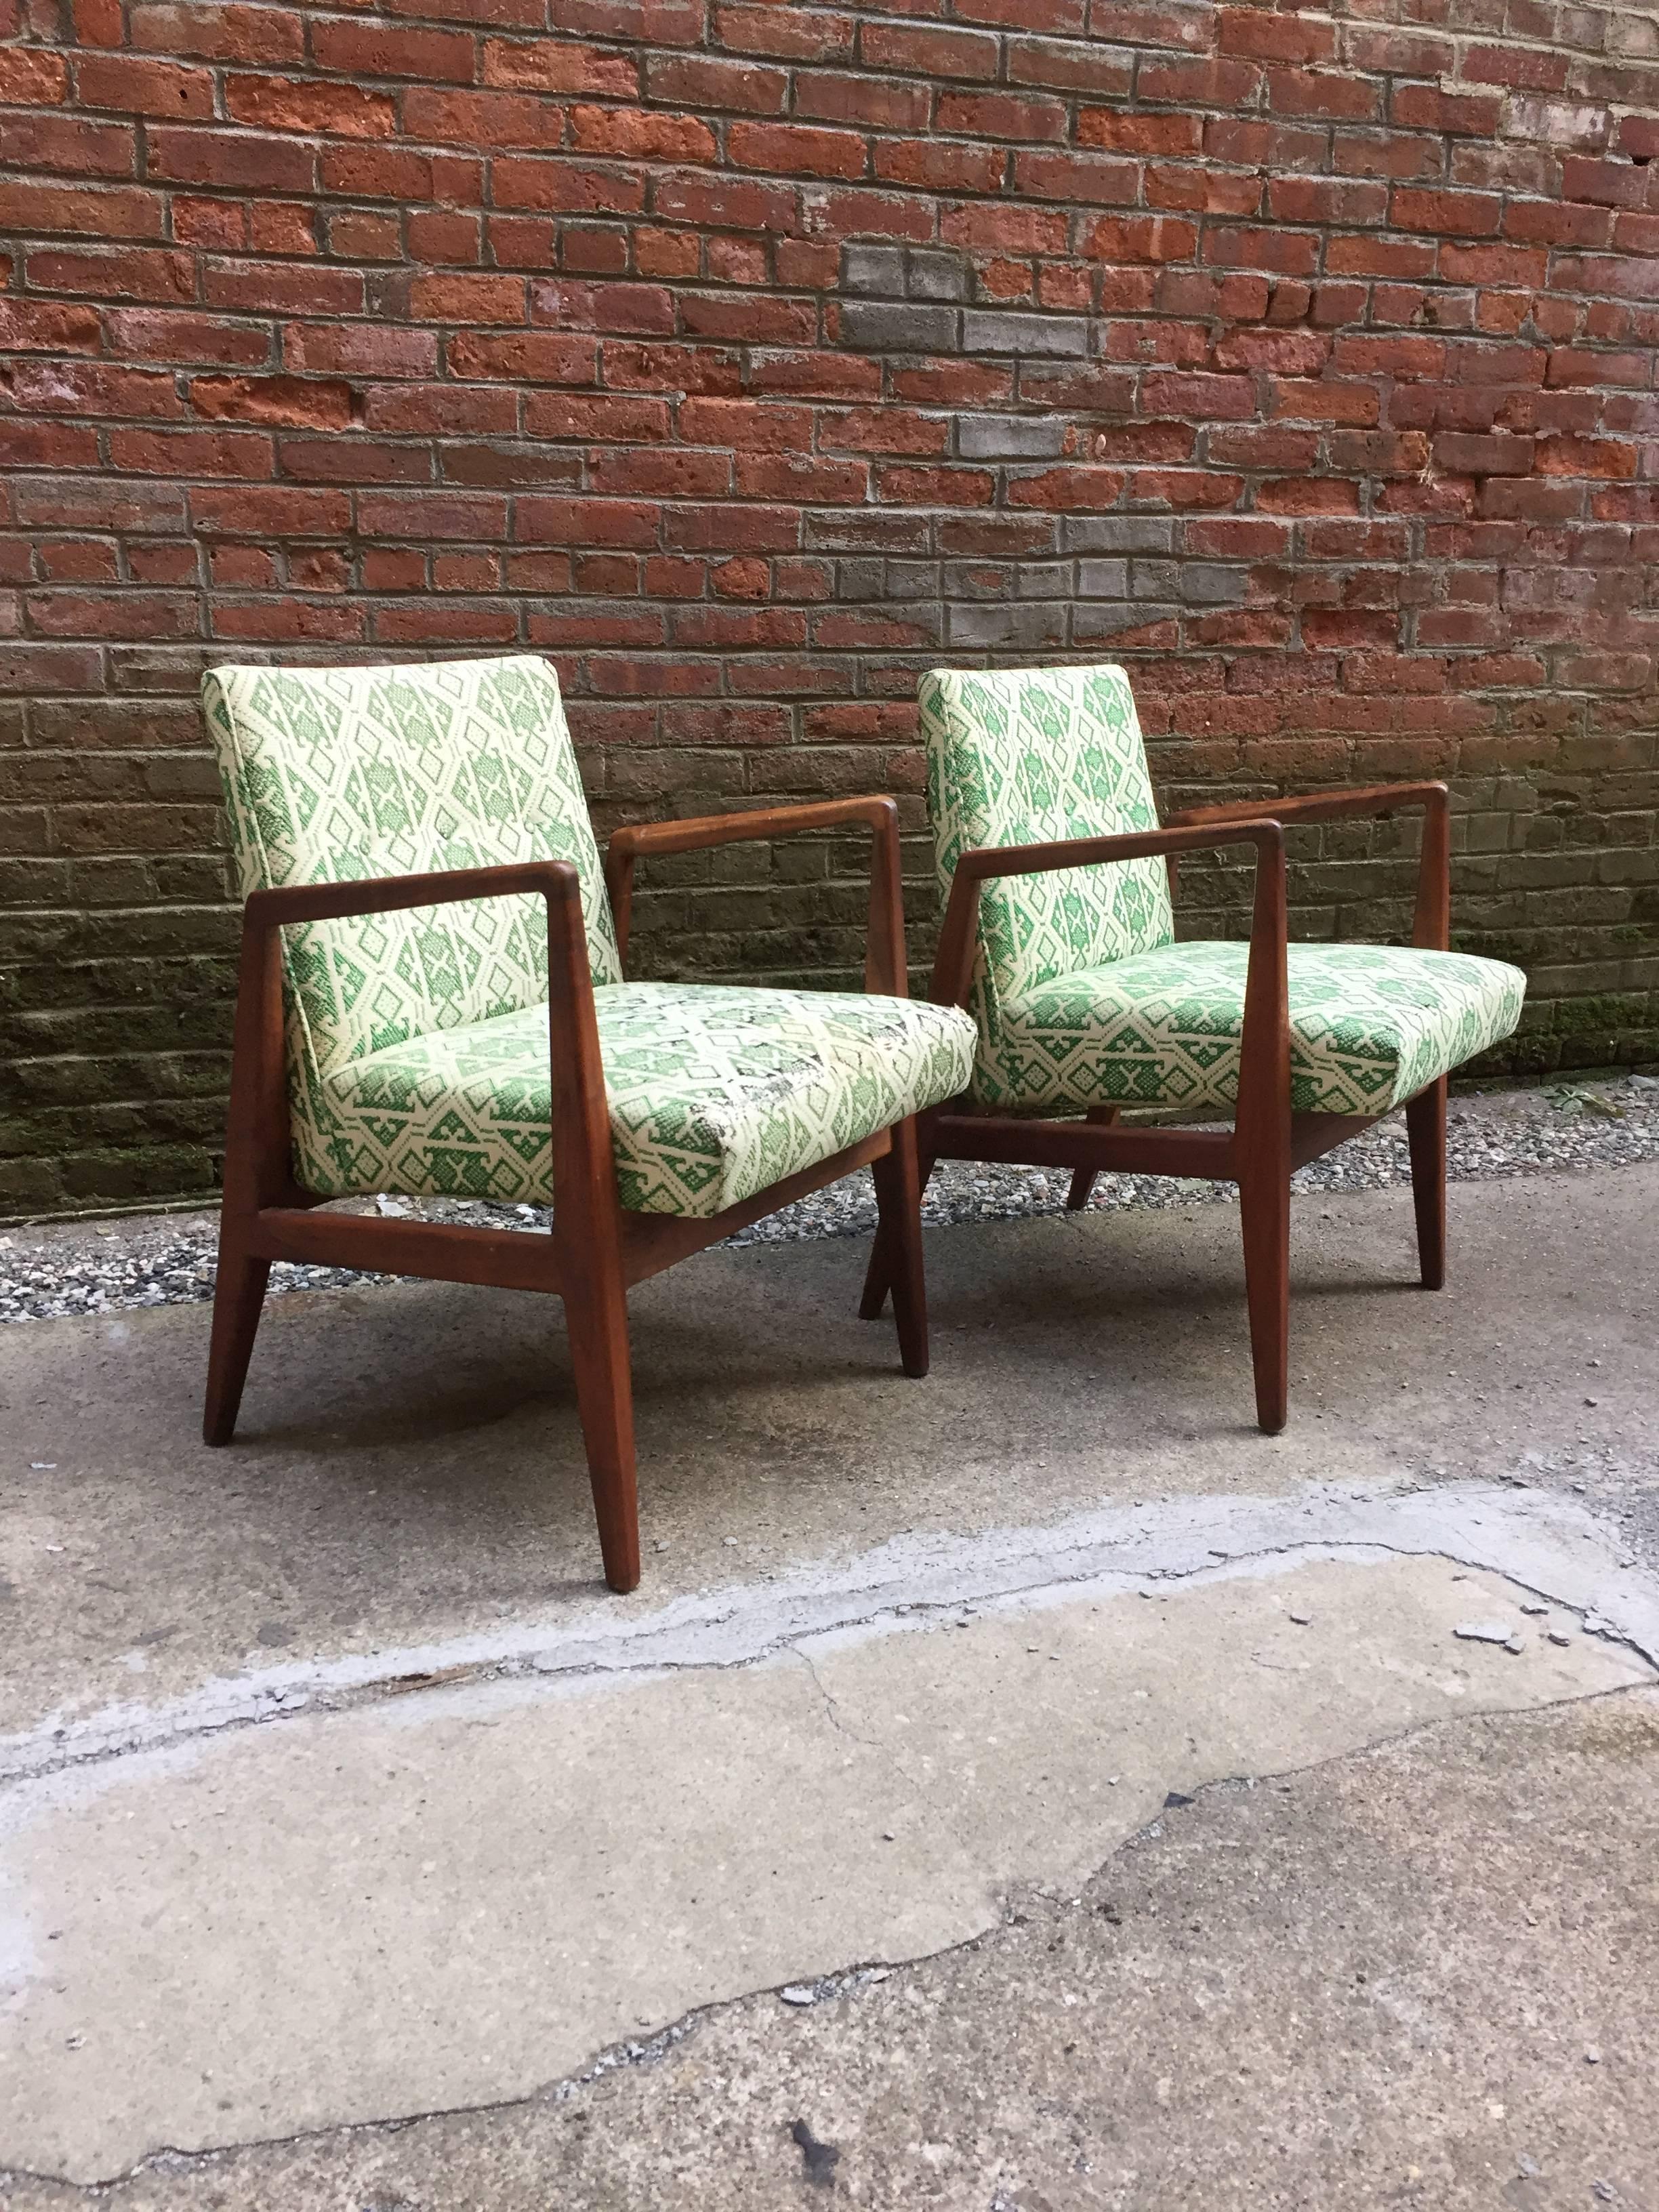 Pair of walnut framed and upholstered armchairs designed by Jens Risom. Sharp and linear.  Oiled walnut frames are in very good, original condition. Period 1960s upholstery. Both chairs are signed underneath.

Re-upholstery suggested.